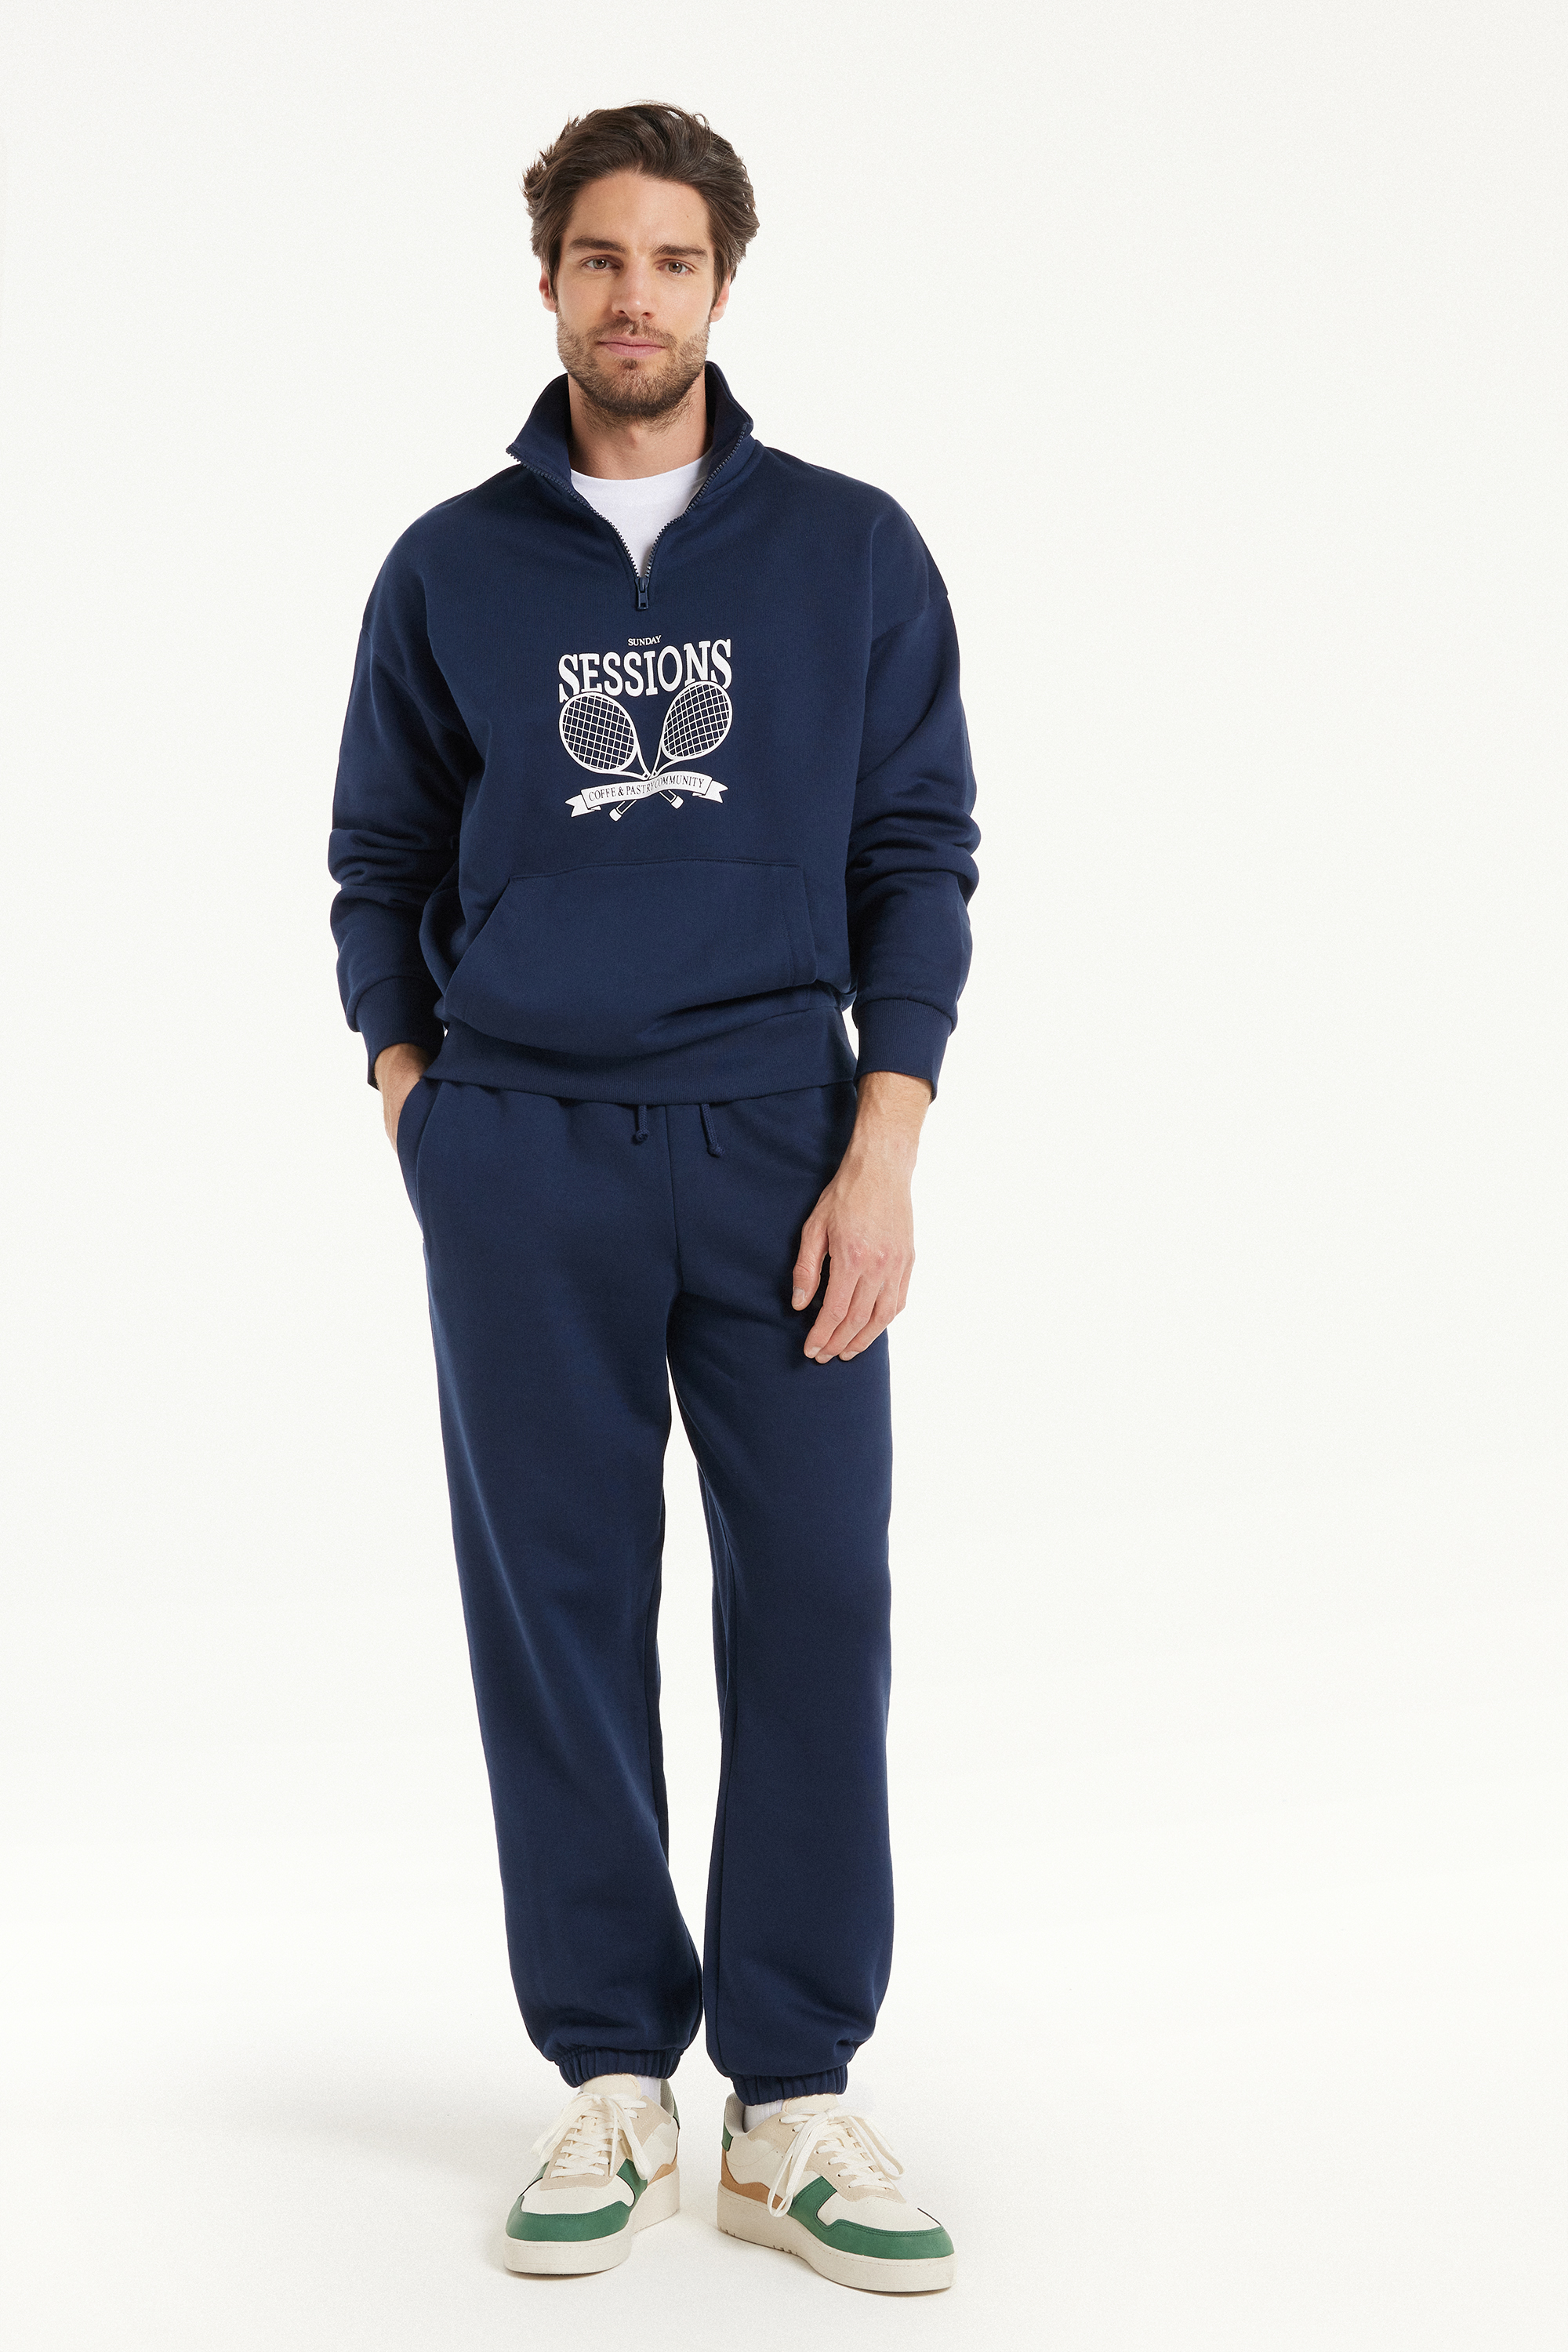 Heavy Fabric Sweatpants with Pockets